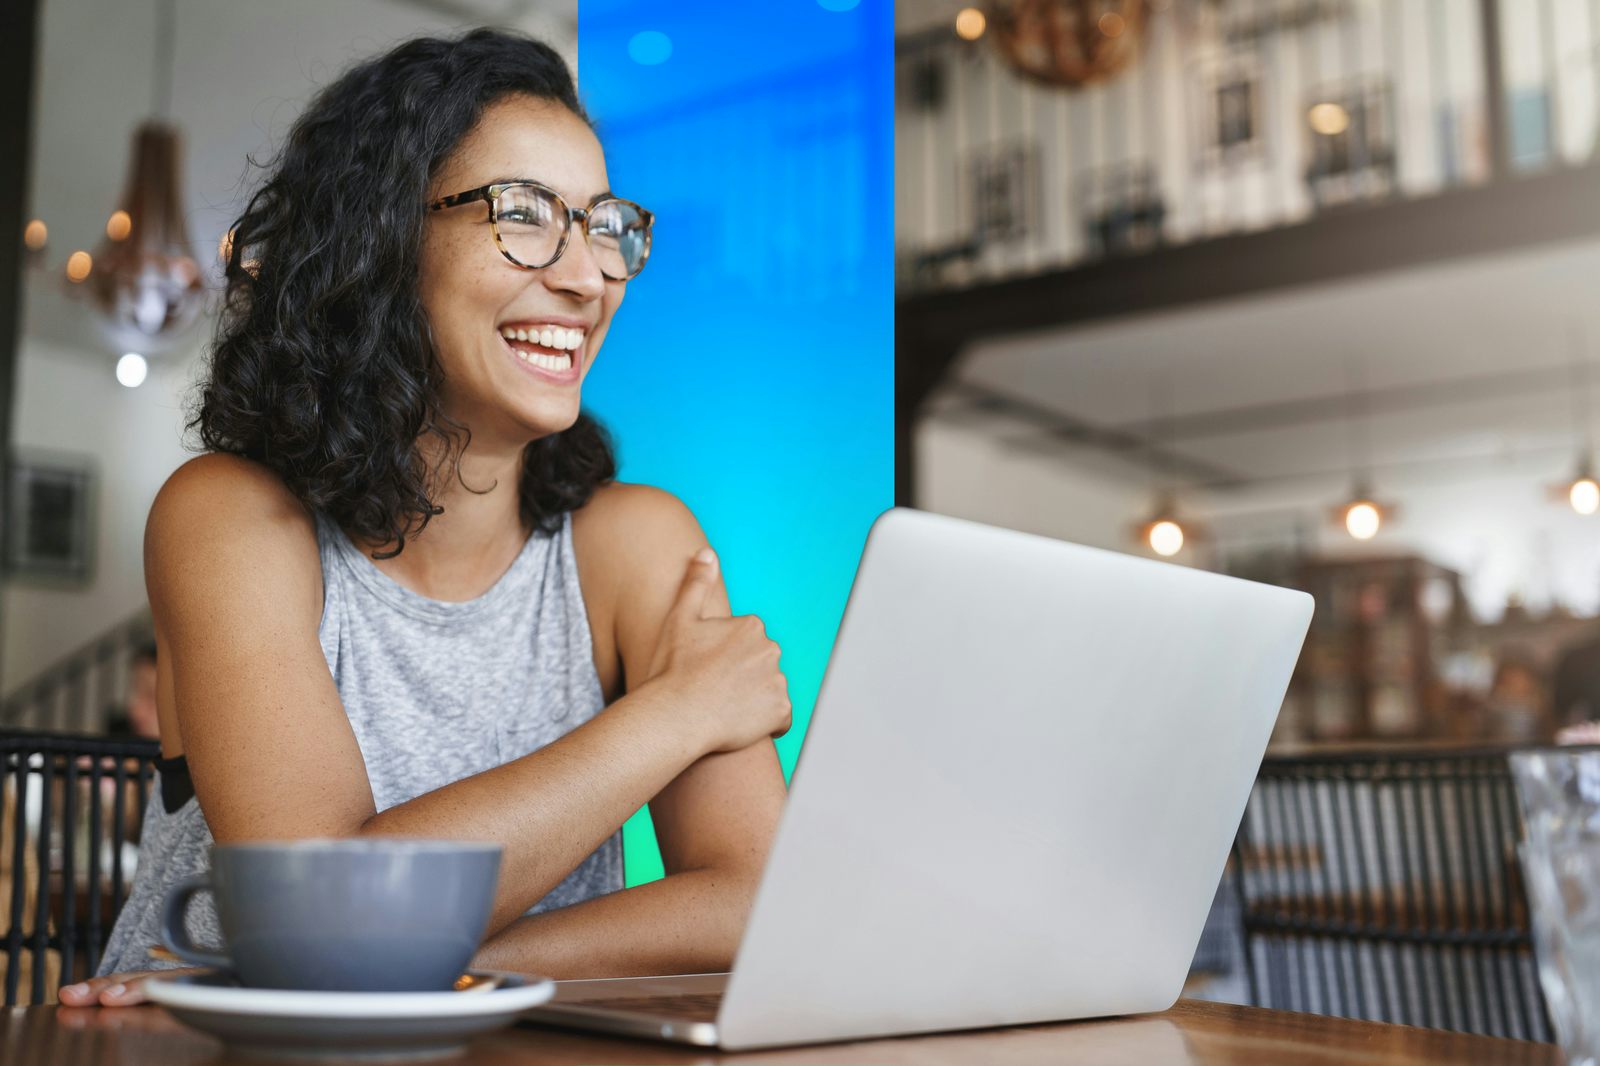 Woman laughing and working in front of a laptop